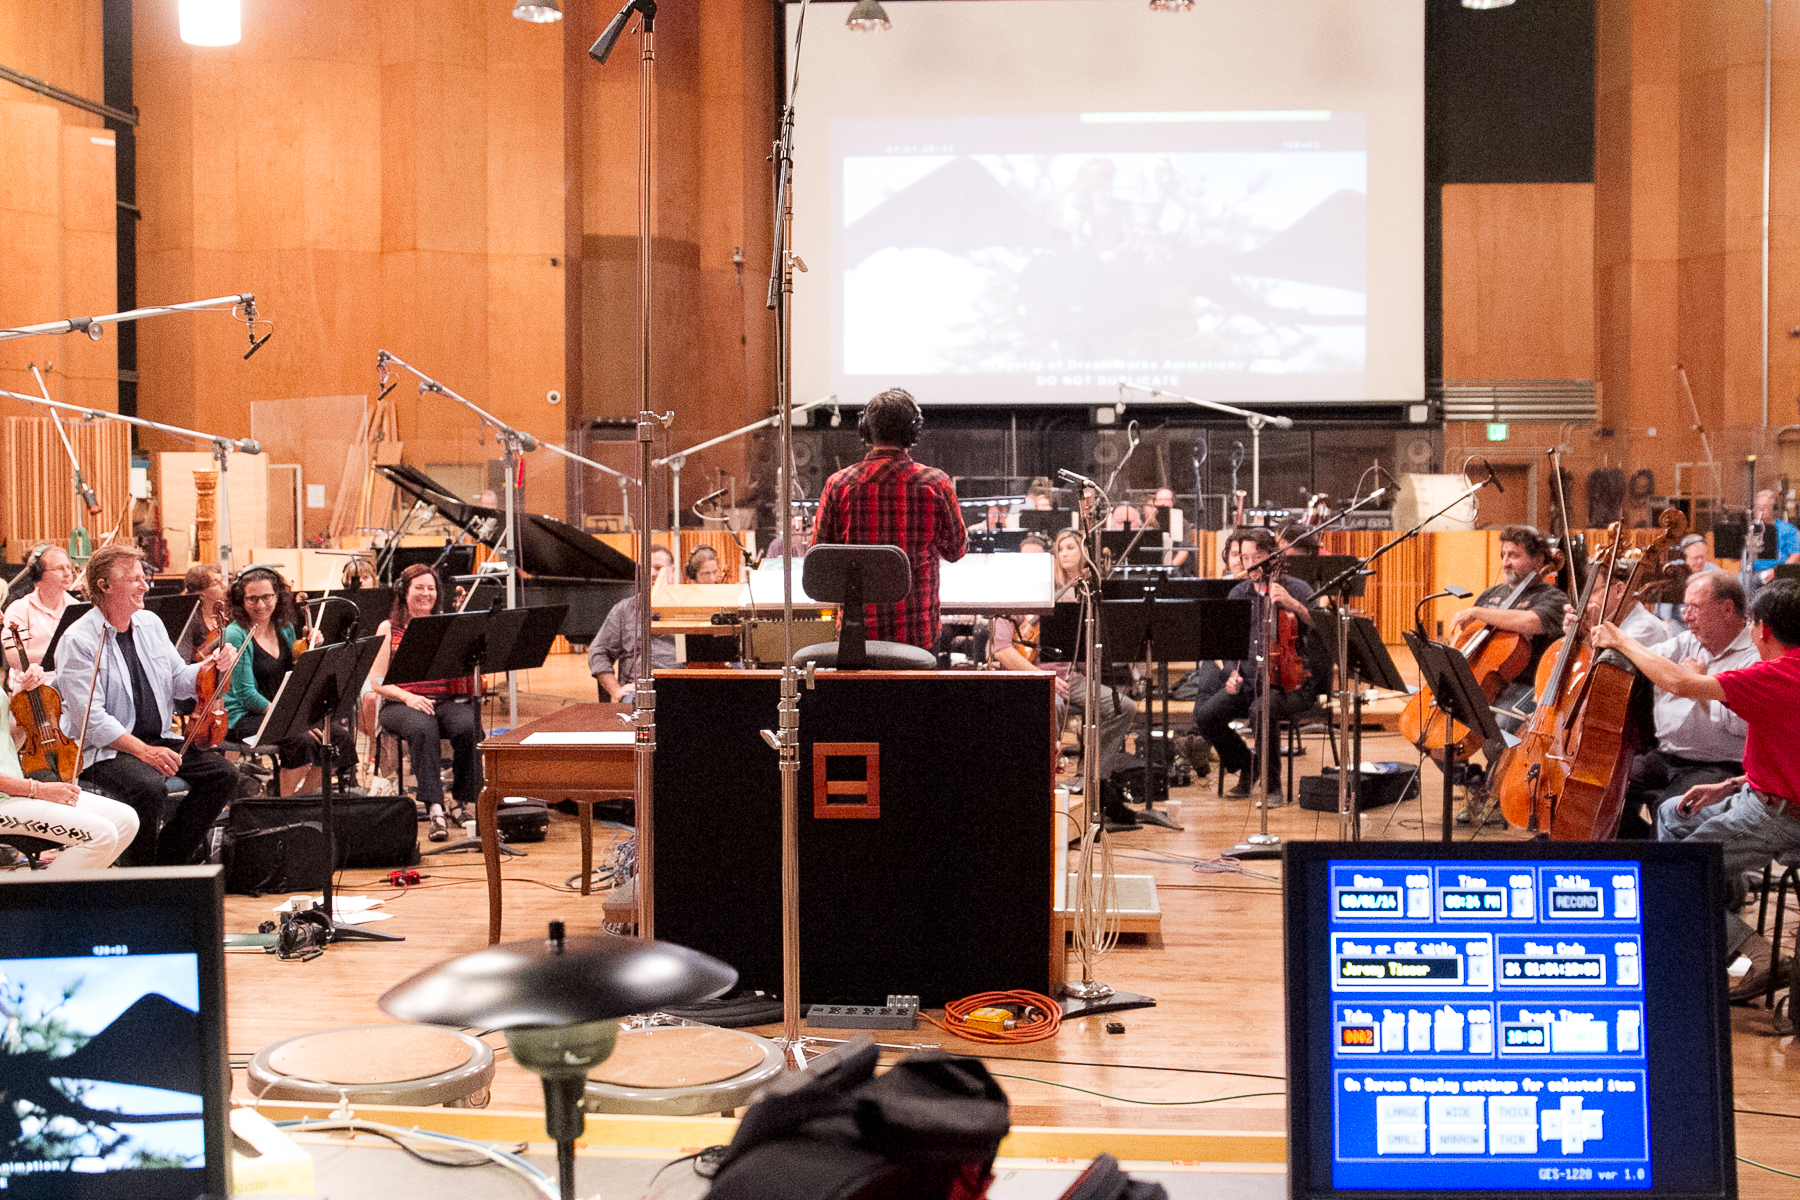 Conducting the Hollywood Studio Symphony at Fox's Newman Scoring Stage, as part of the ASCAP Film Scoring Workshop. Aug 1, 2014